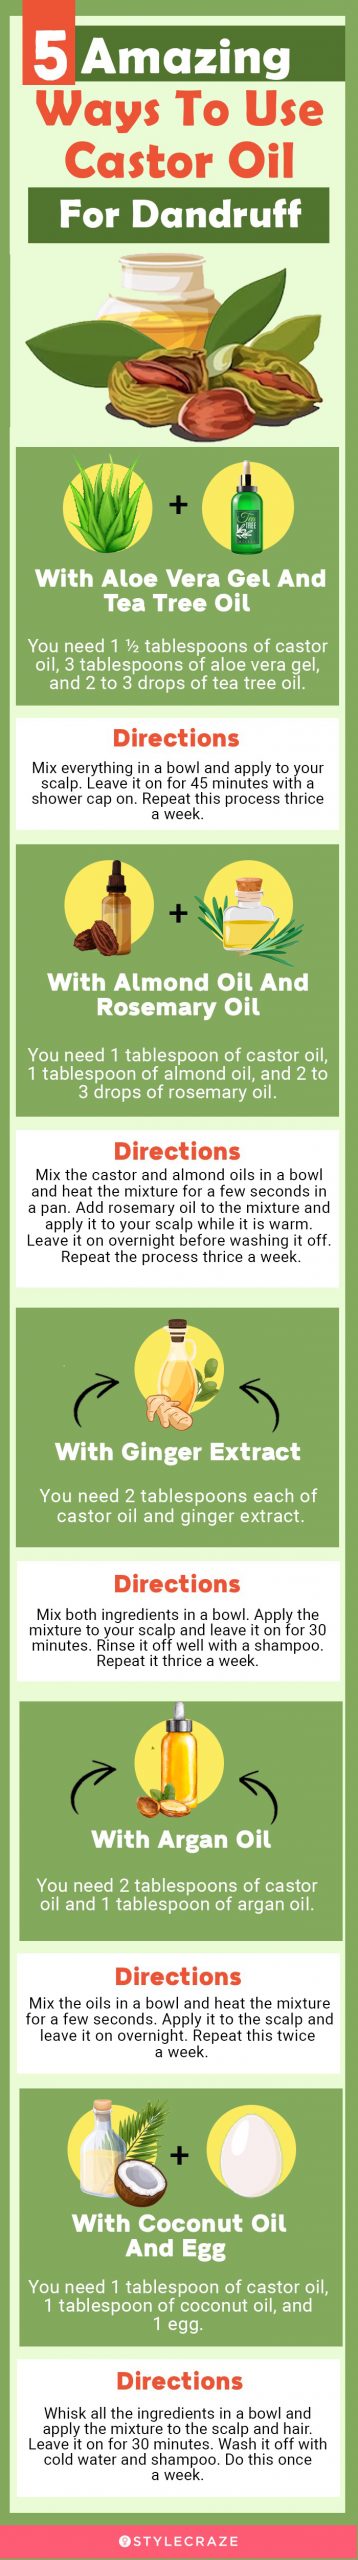 5 amazing ways to use castor oil for dandruff (infographic) 